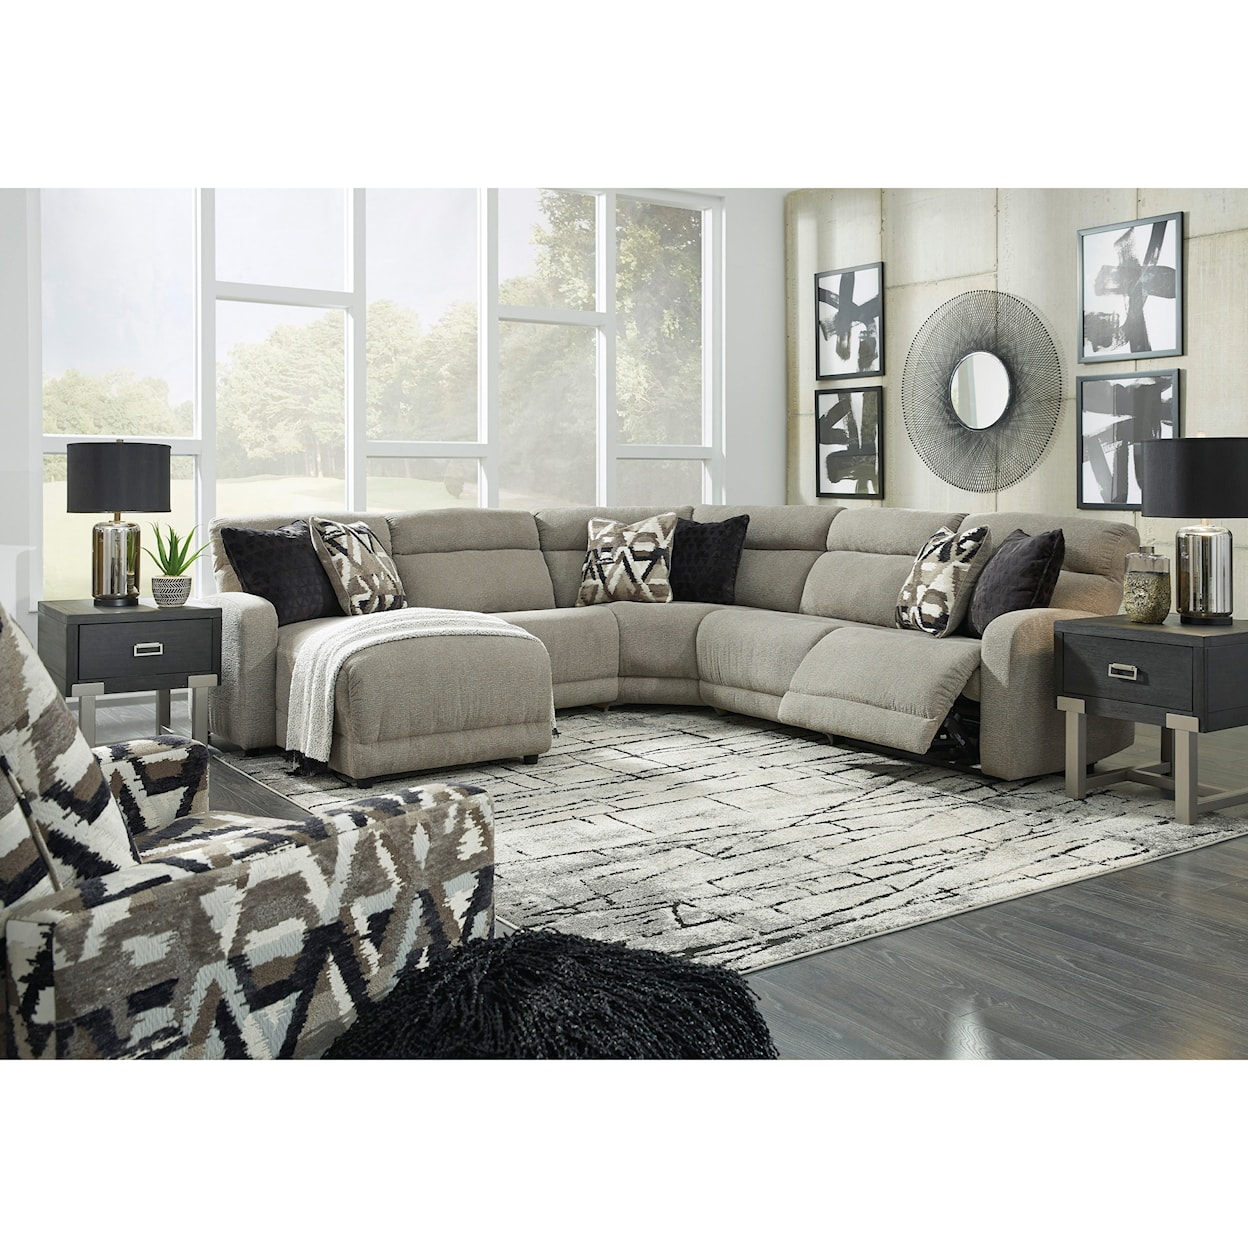 Signature Design by Ashley Colleyville Power Reclining Living Room Group